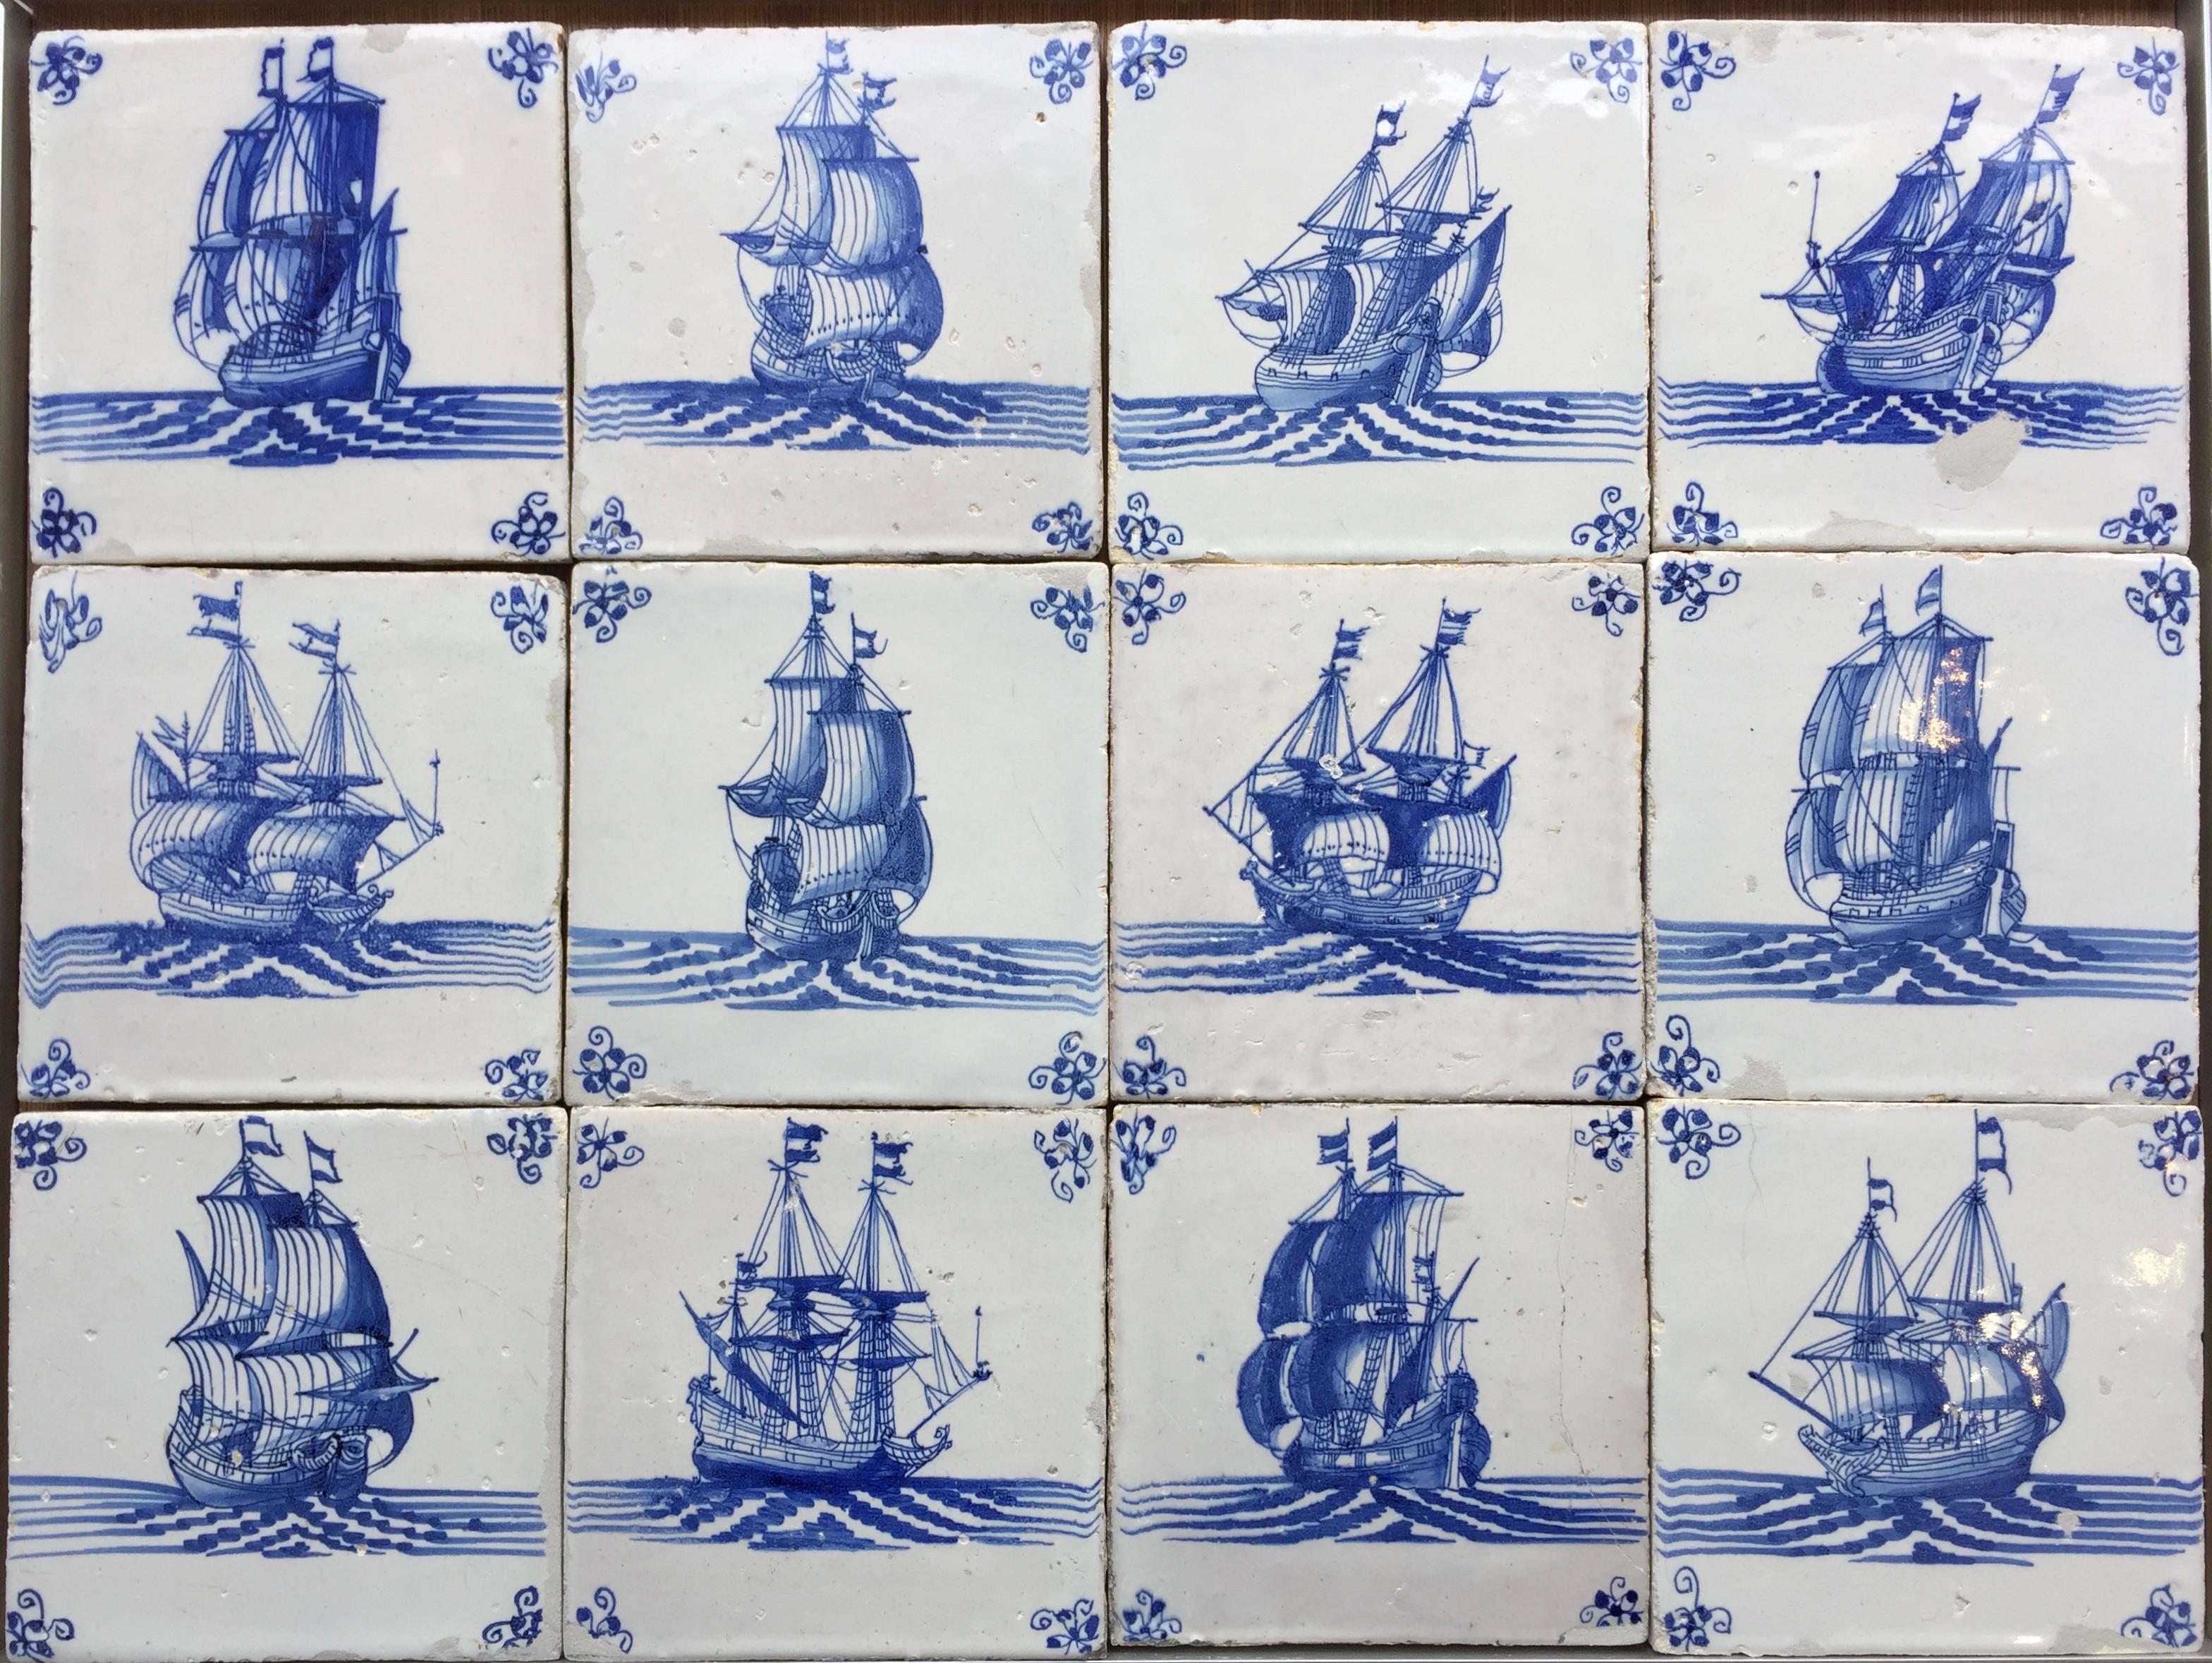 A rare set of 12 blue and white Dutch Delft tiles with three-master ships.
Made in Amsterdam, The Netherlands.
Circa 1660.

This set of tiles is of very fine quality and has a bright glaze, characteristic for the Amsterdam tile production of the